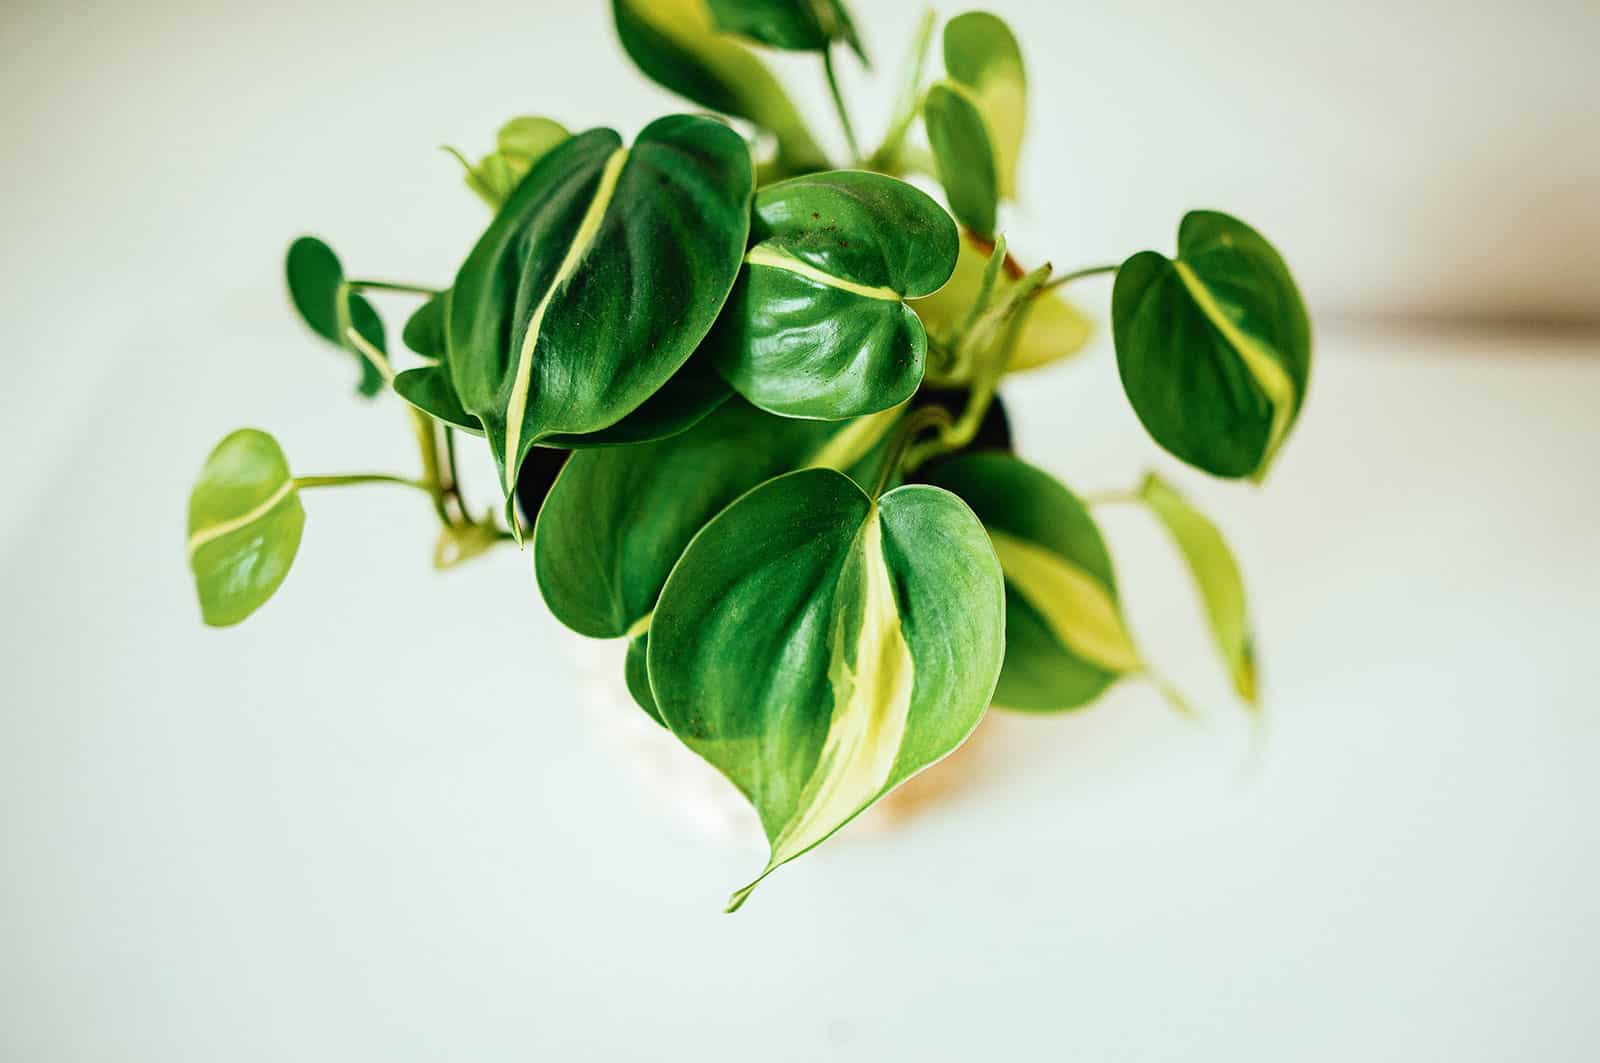 Philodendron brasil houseplant on a white table